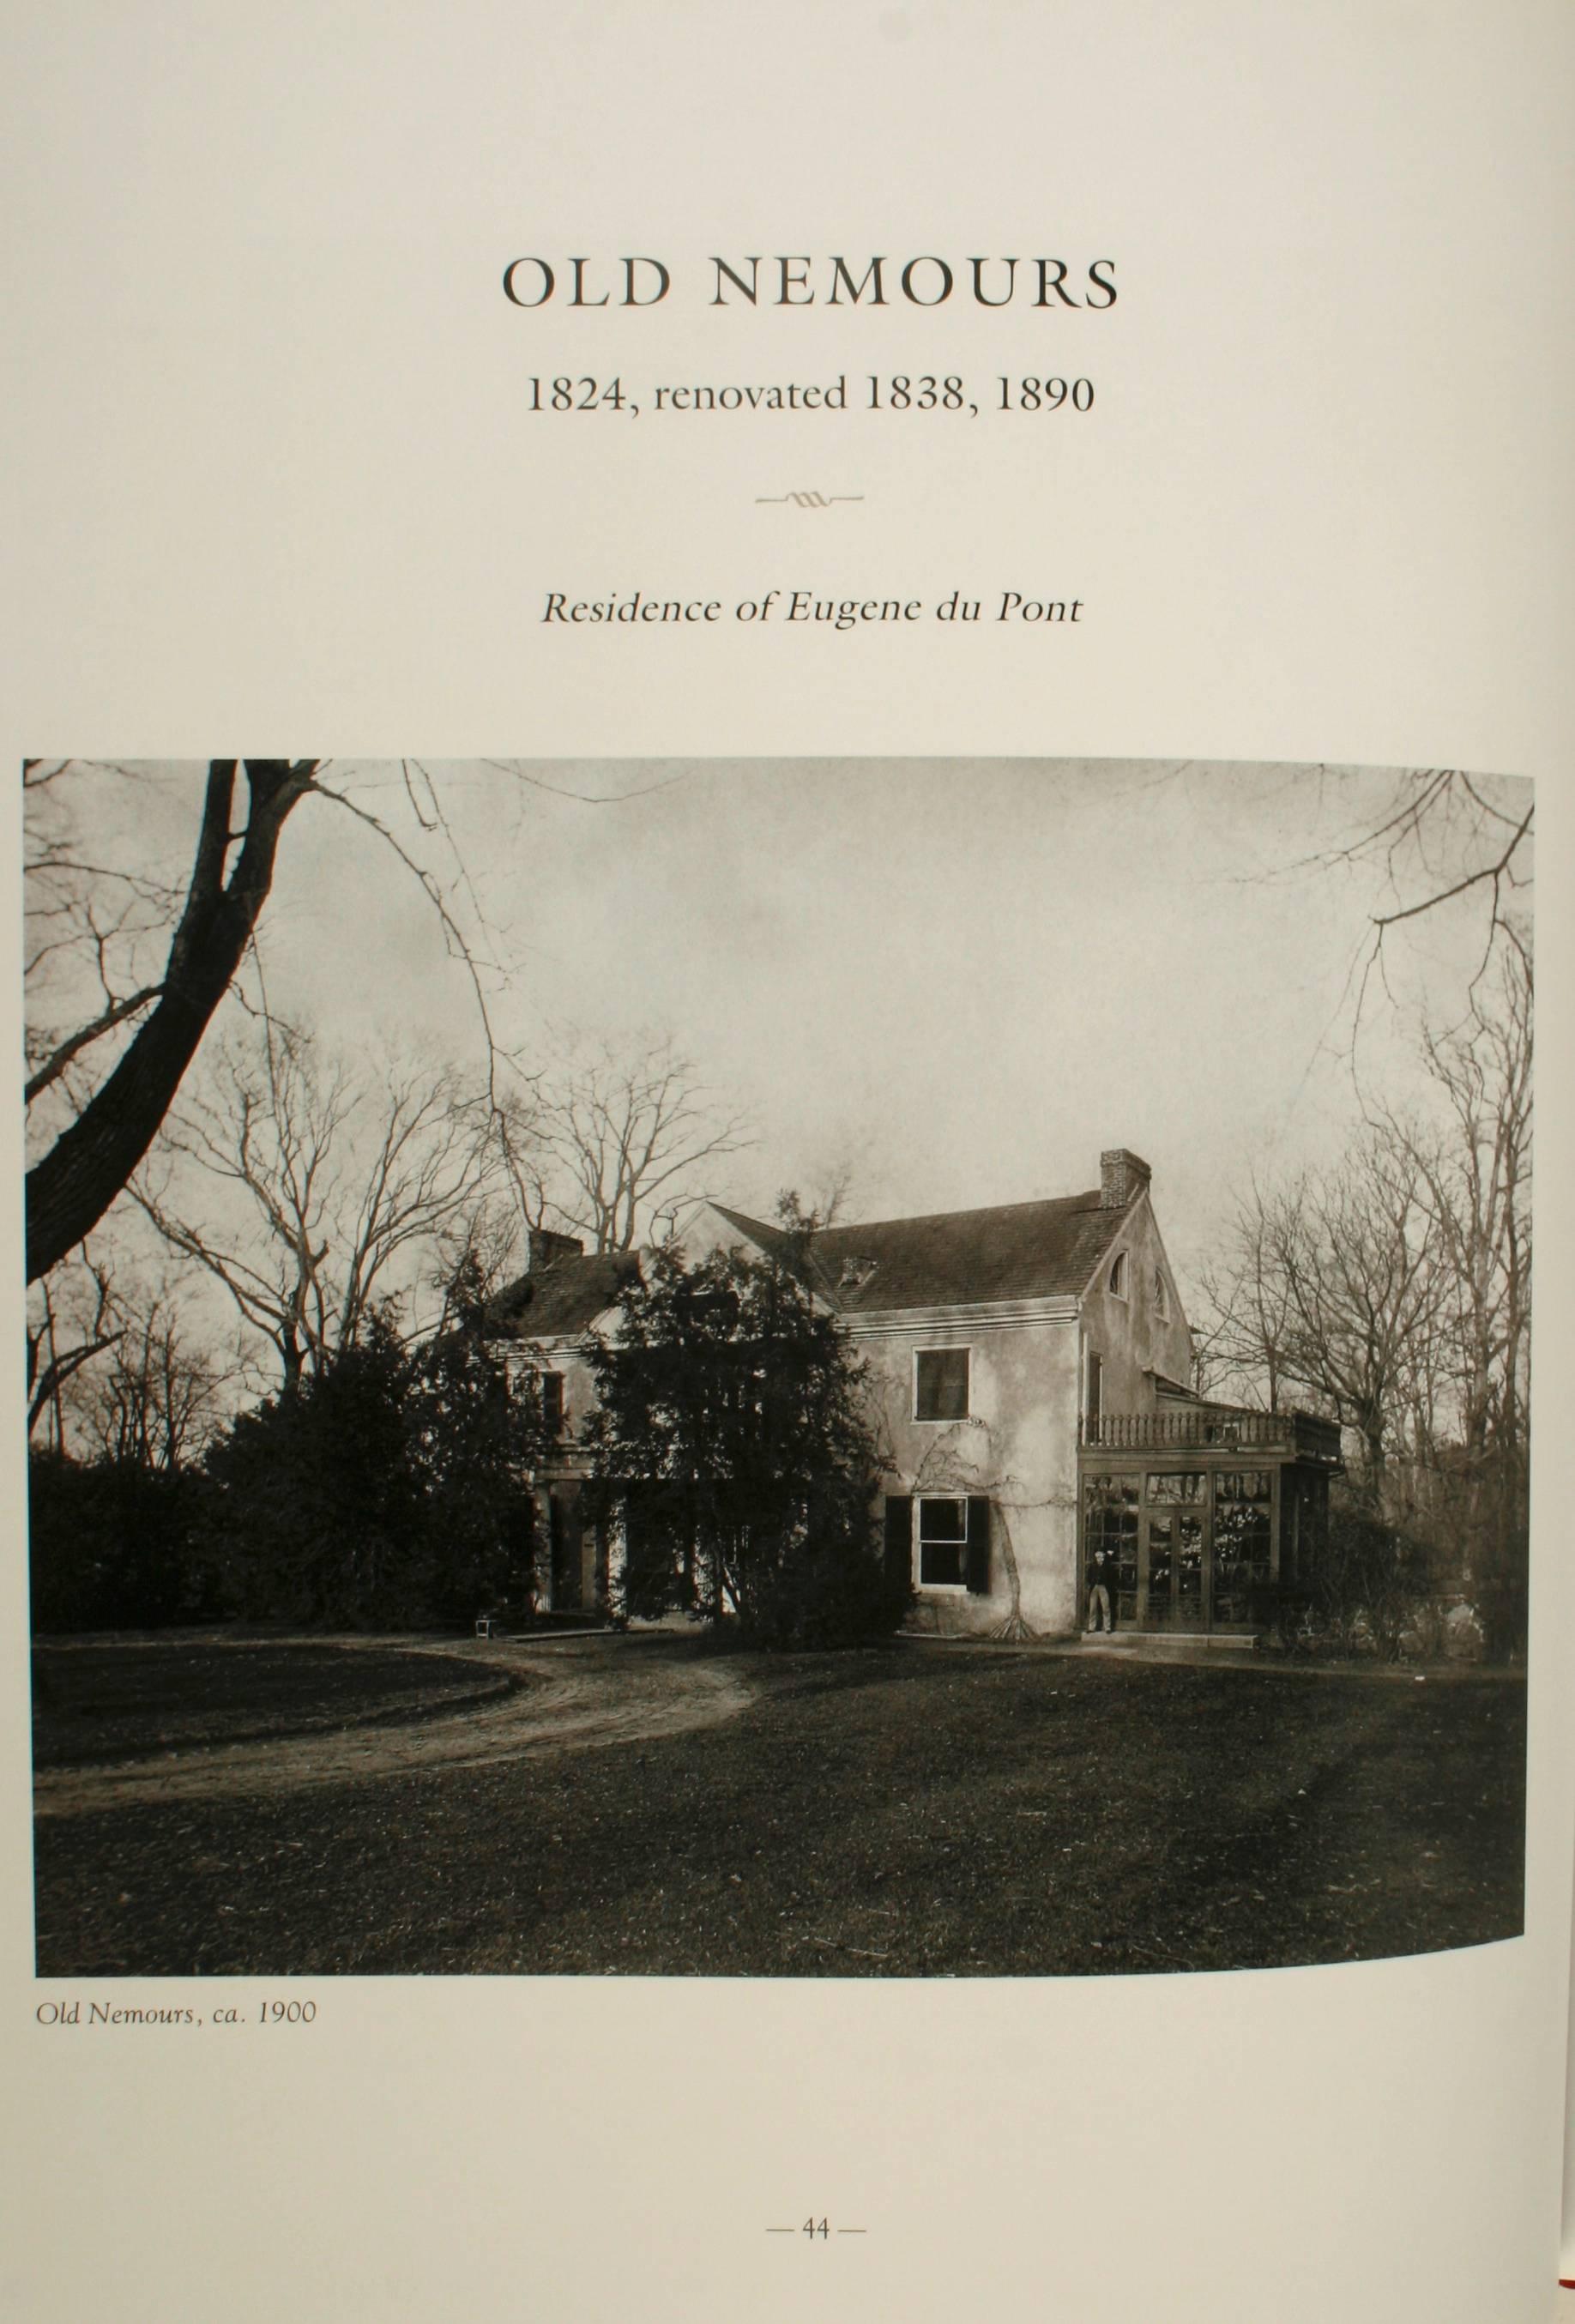 Paper Du Ponts Houses and Gardens in the Brandywine, 1st Ed